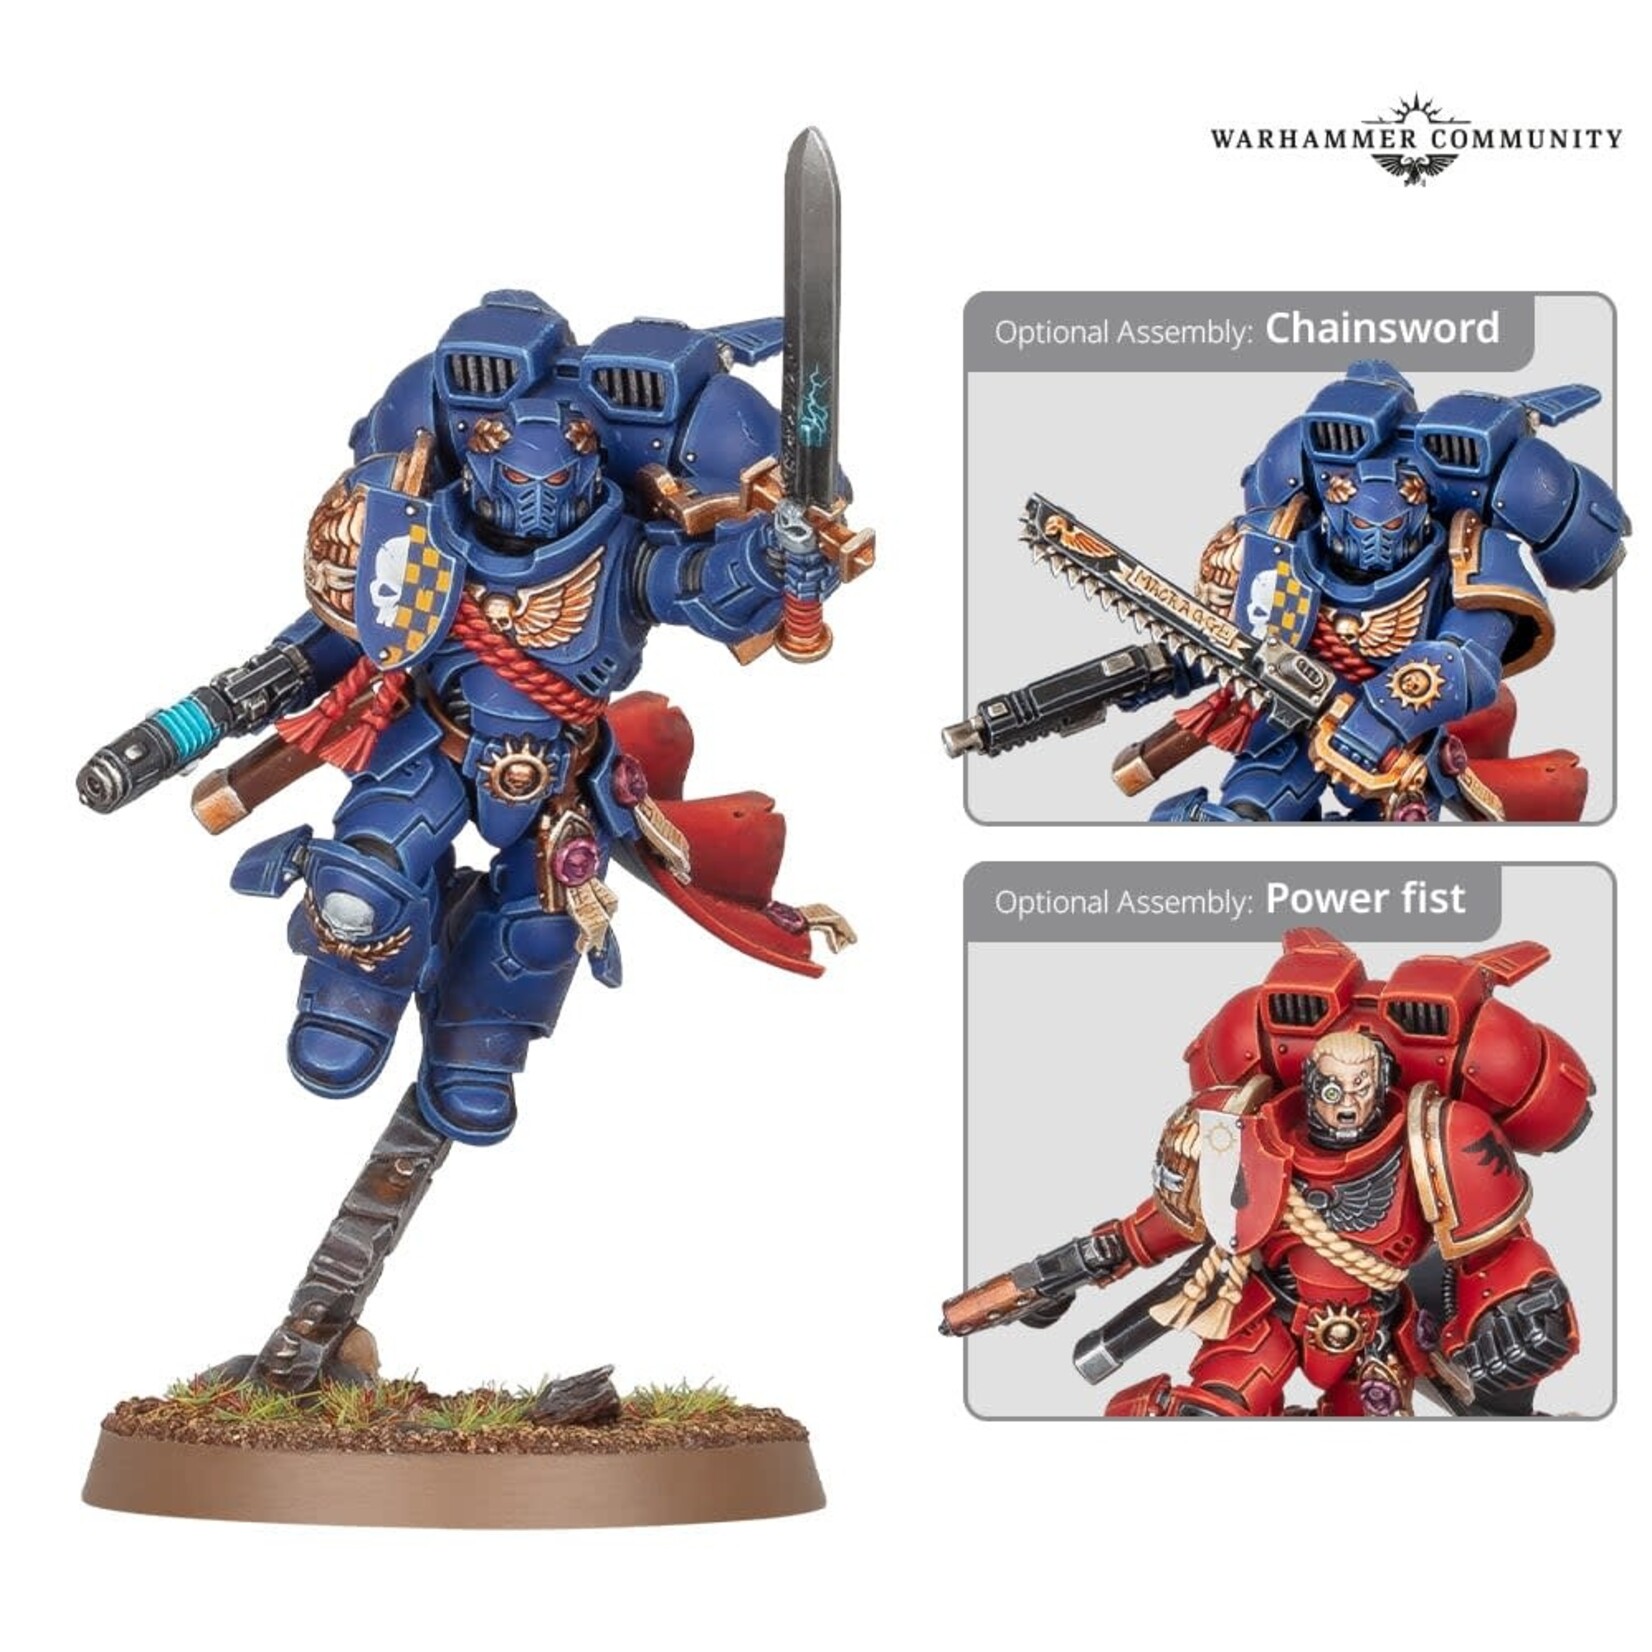 Games Workshop SPACE MARINES: CAPTAIN WITH JUMP PACK